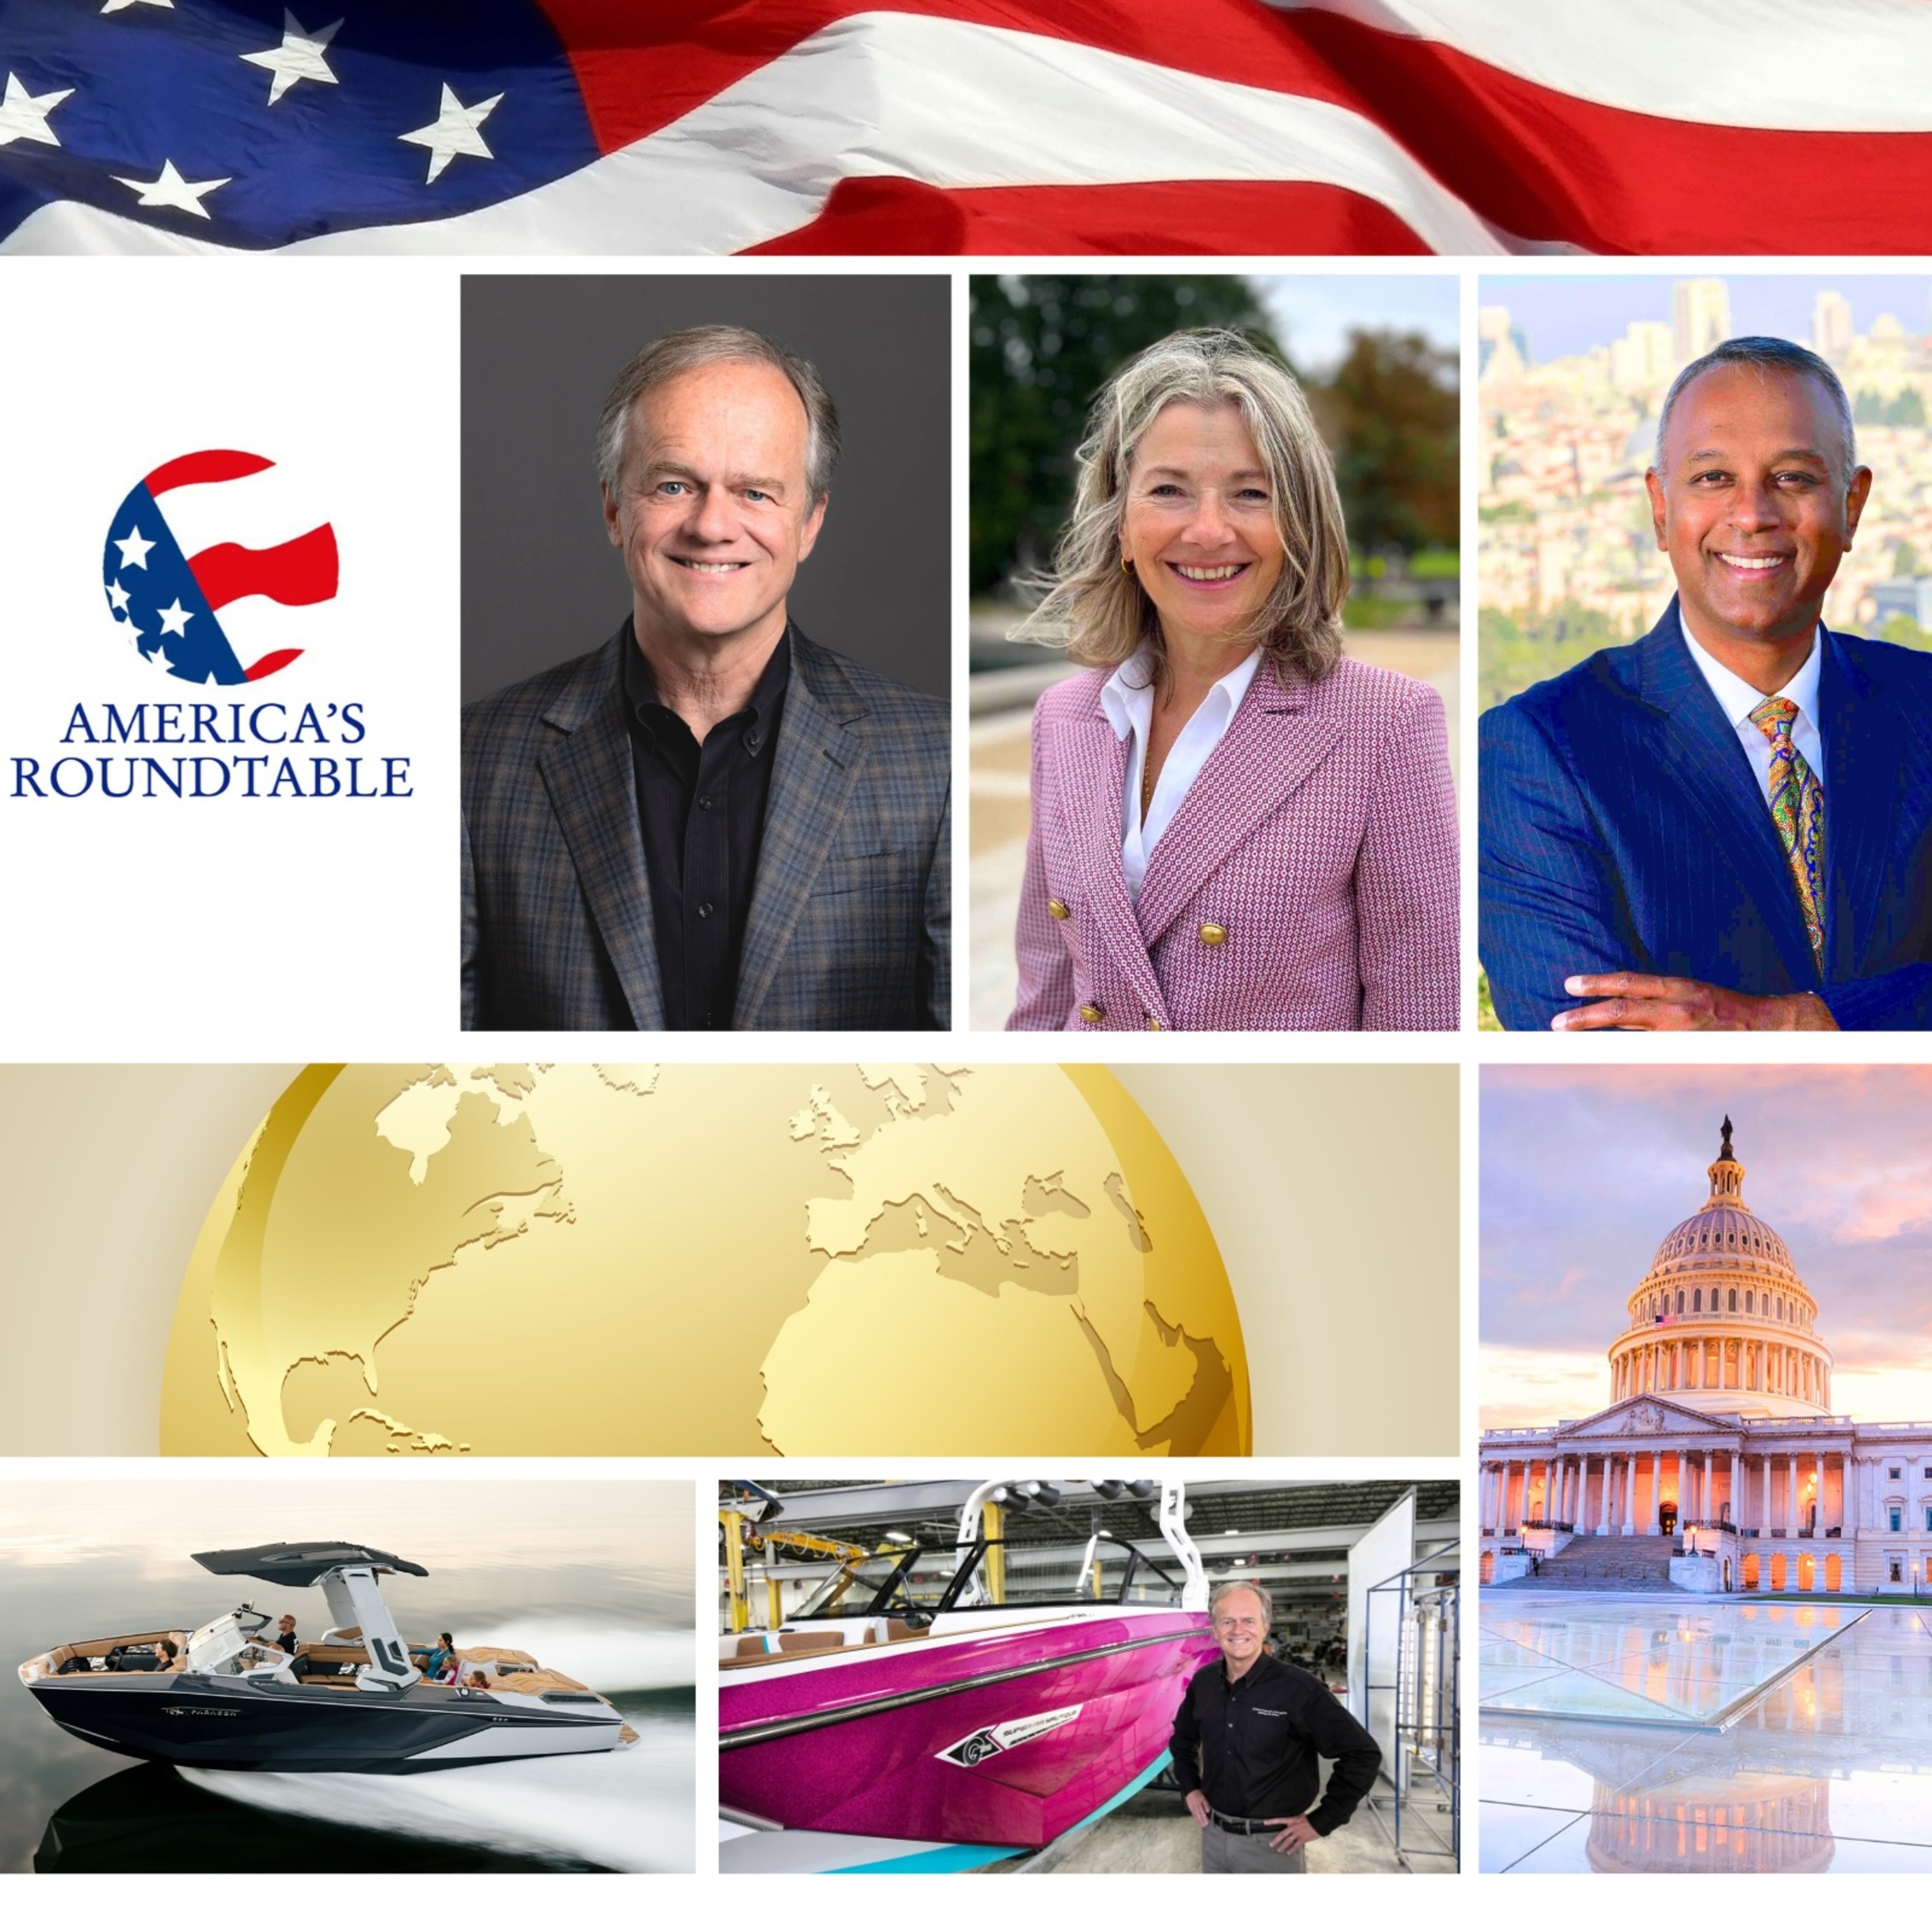 America's Roundtable with Bill Yeargin, CEO, Correct Craft and Author of "Faith Leap" | Advancing The Abraham Accords